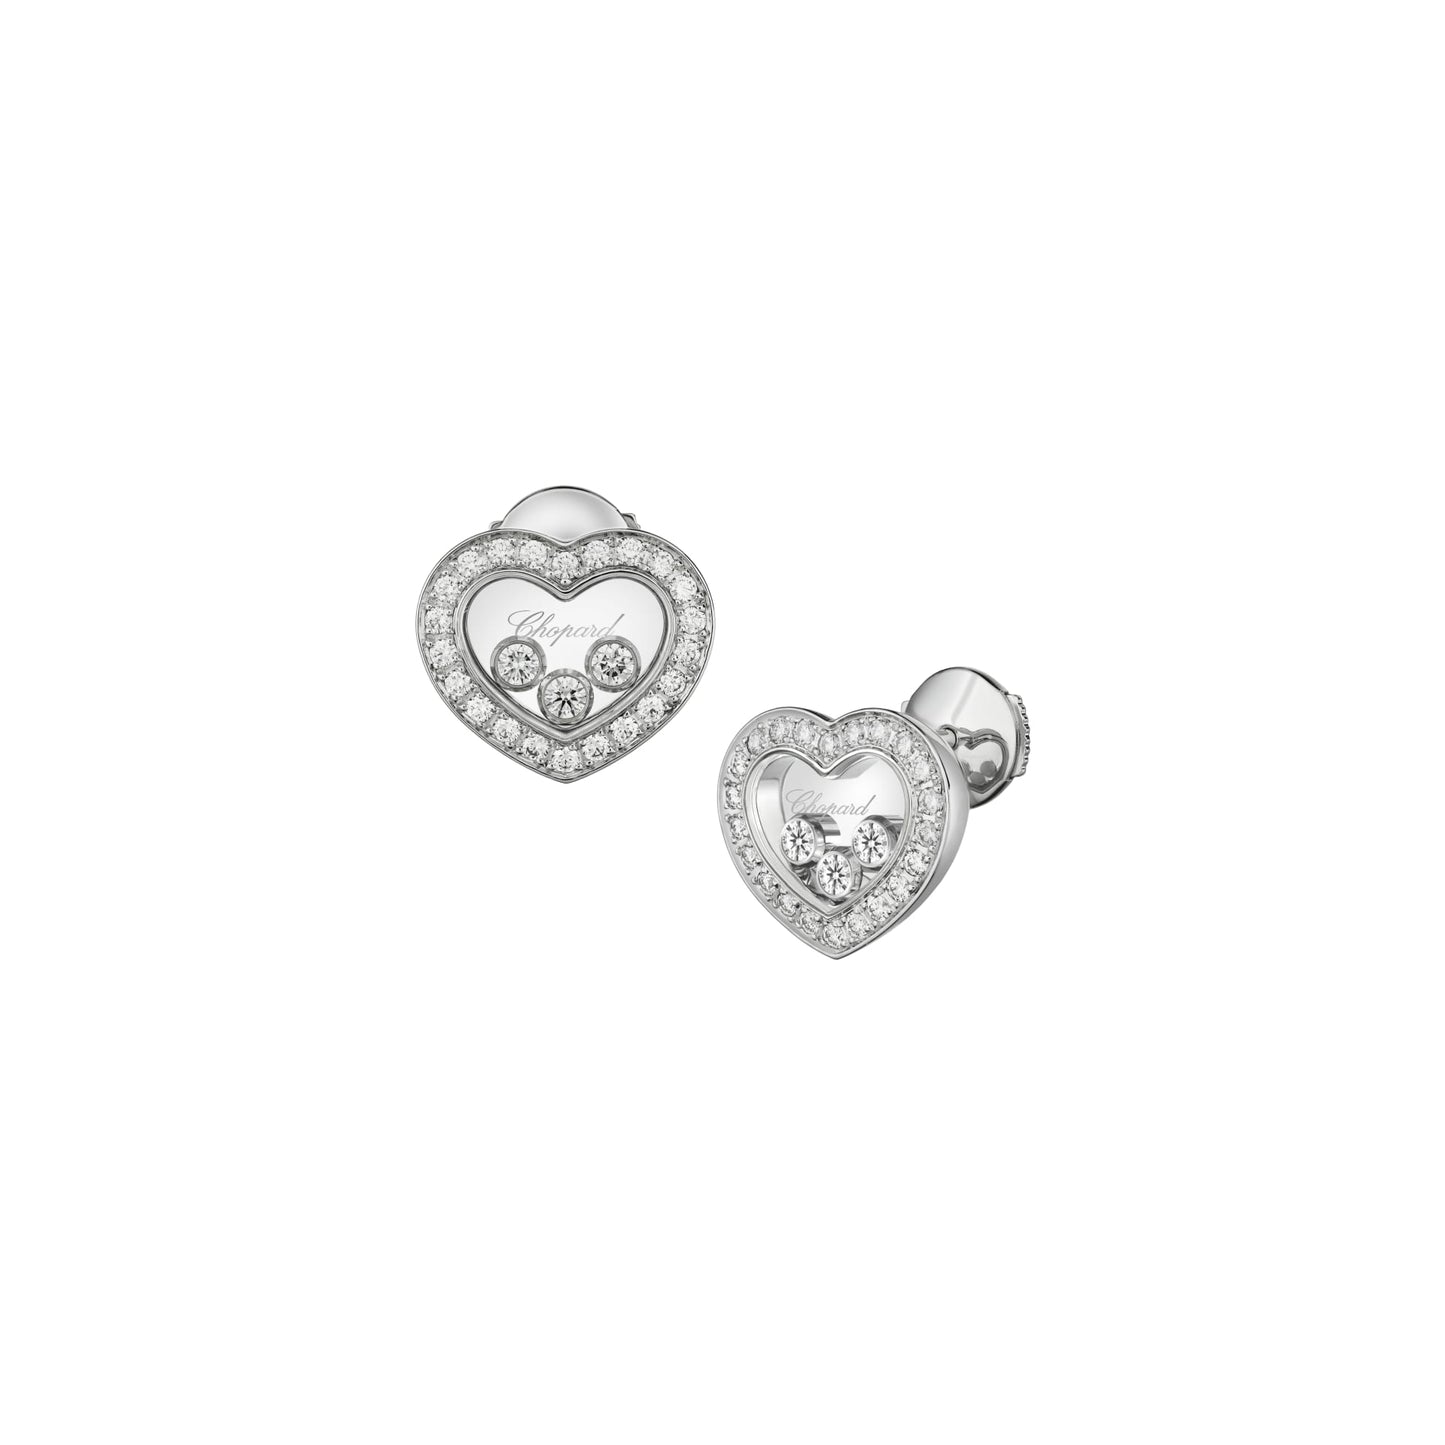 HAPPY DIAMONDS ICONS EARRINGS, ETHICAL WHITE GOLD, DIAMONDS 83A611-1201